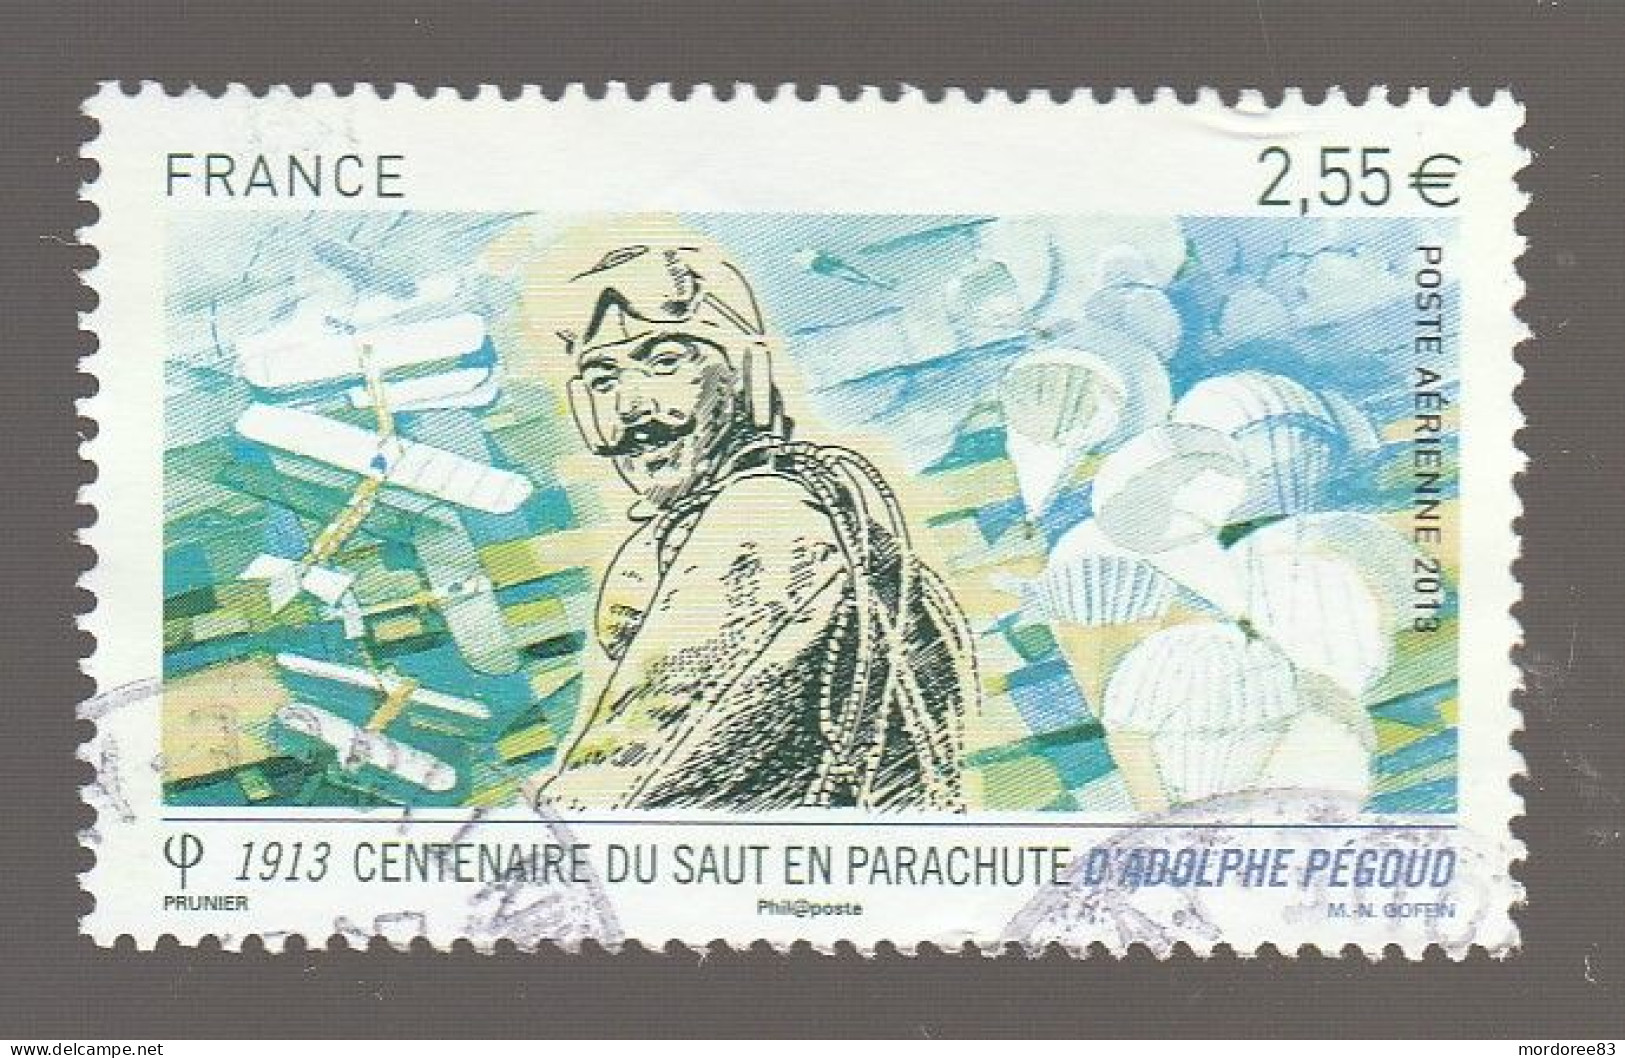 FRANCE 2013  ADOLPHE PEGOUD  OBLITERE  - PA 76 - 1960-.... Used